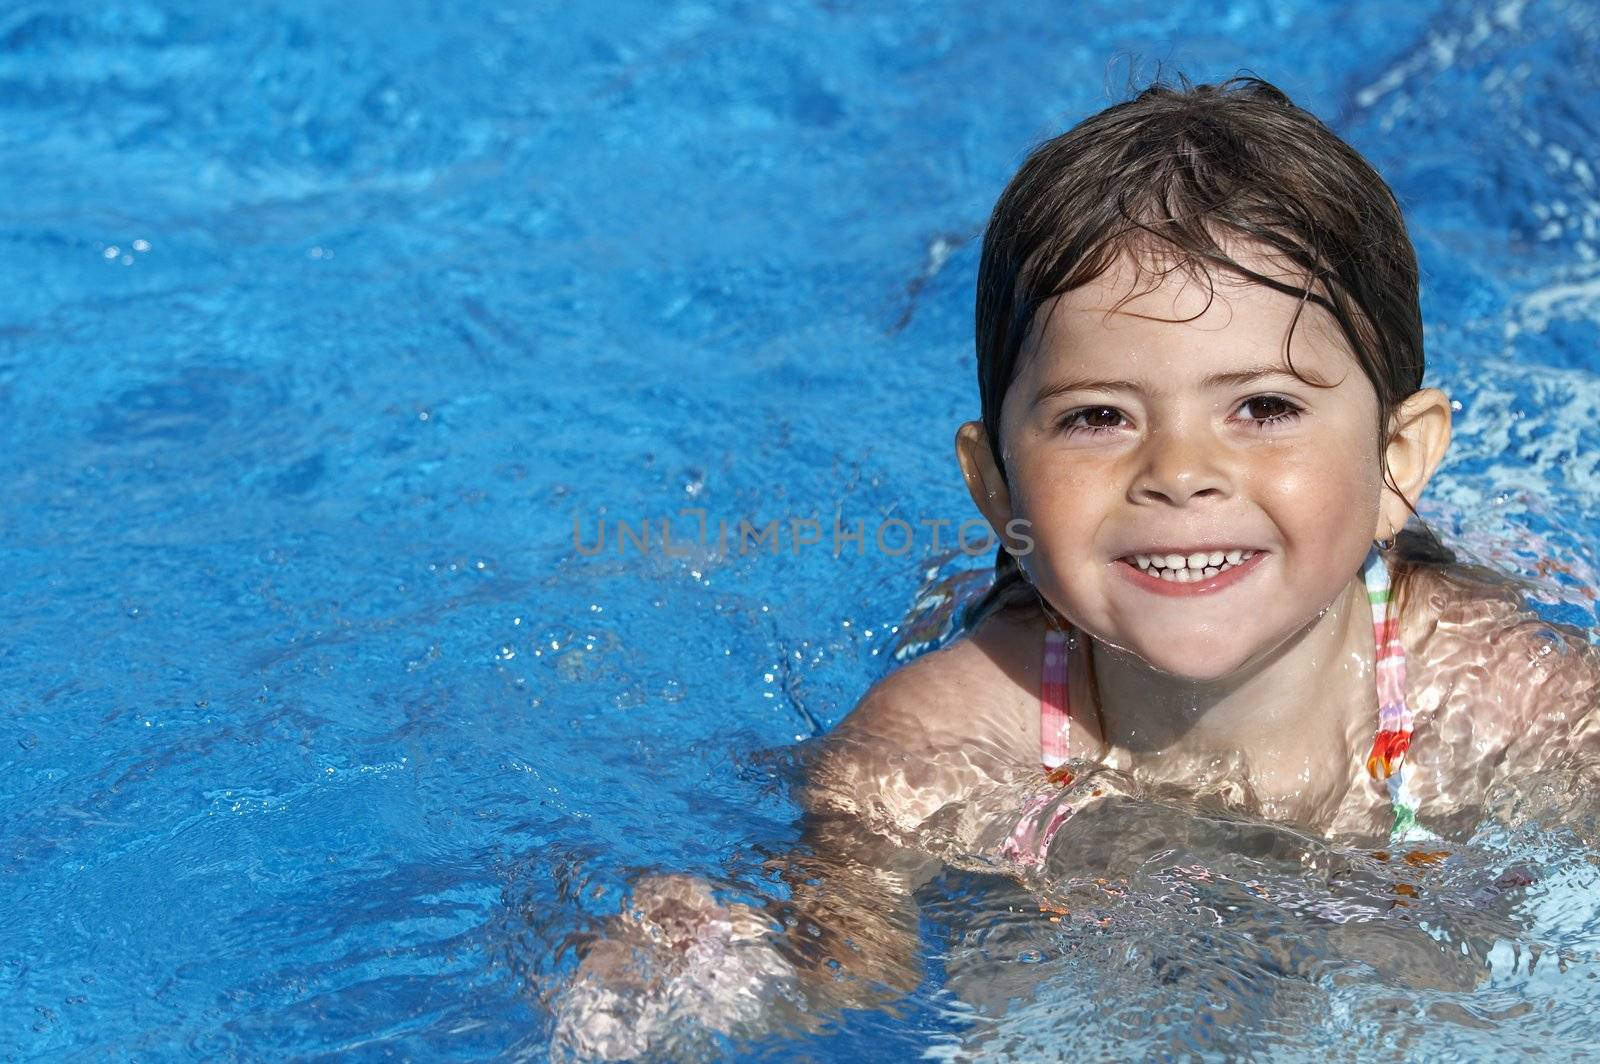 a cute little girl in pool water during the summer